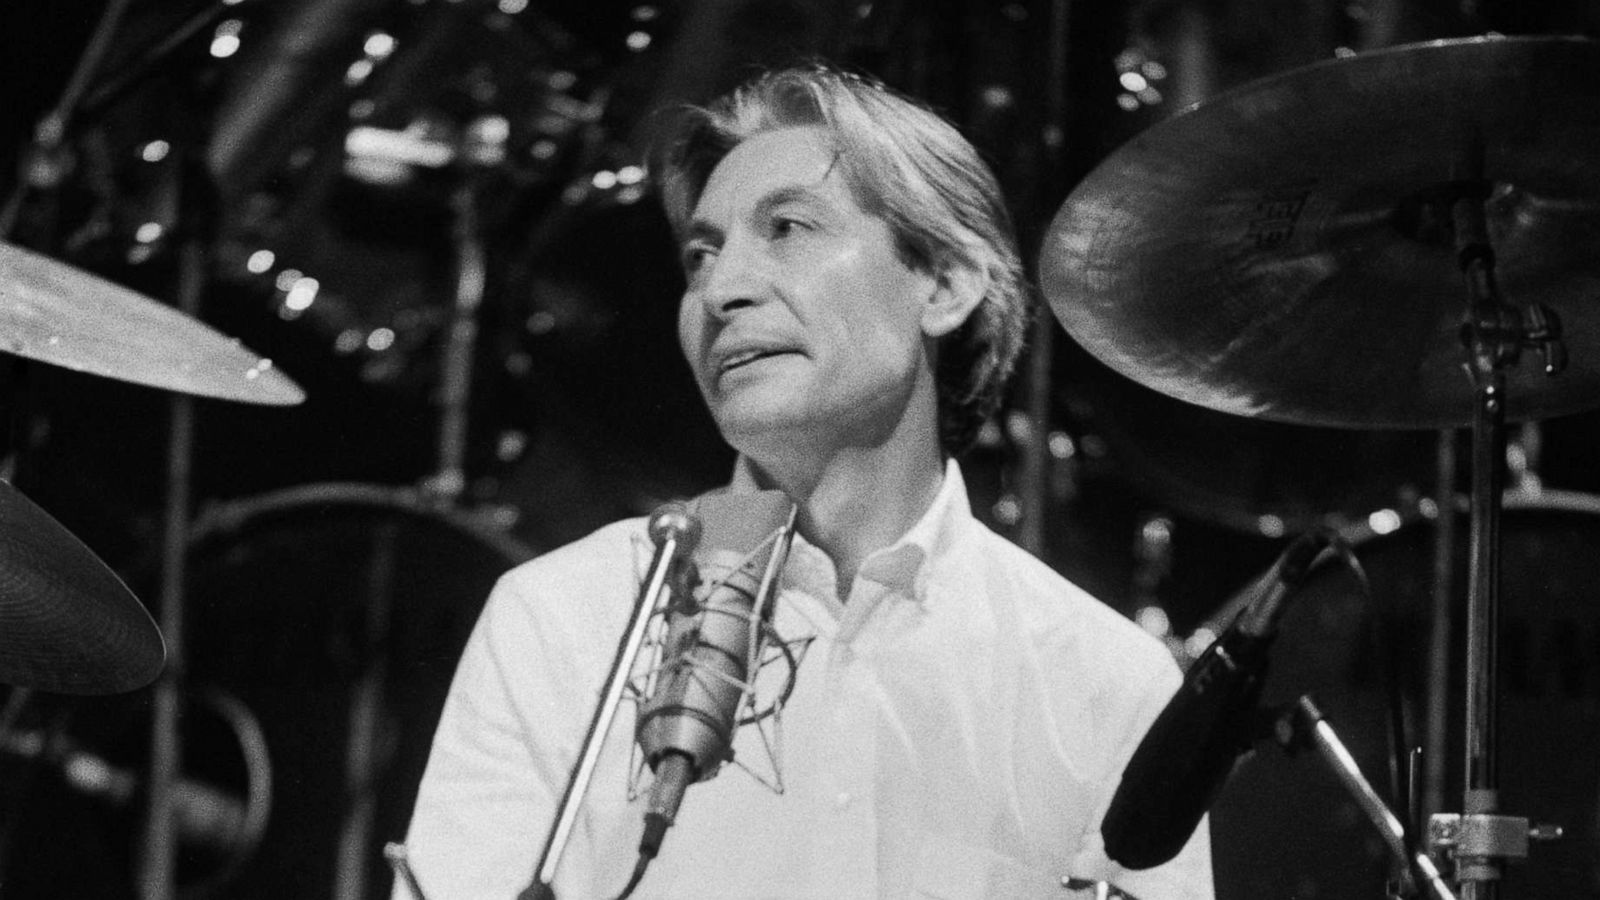 PHOTO: English drummer Charlie Watts performing during a charity concert at the Royal Albert Hall, London, Sept. 20, 1983.